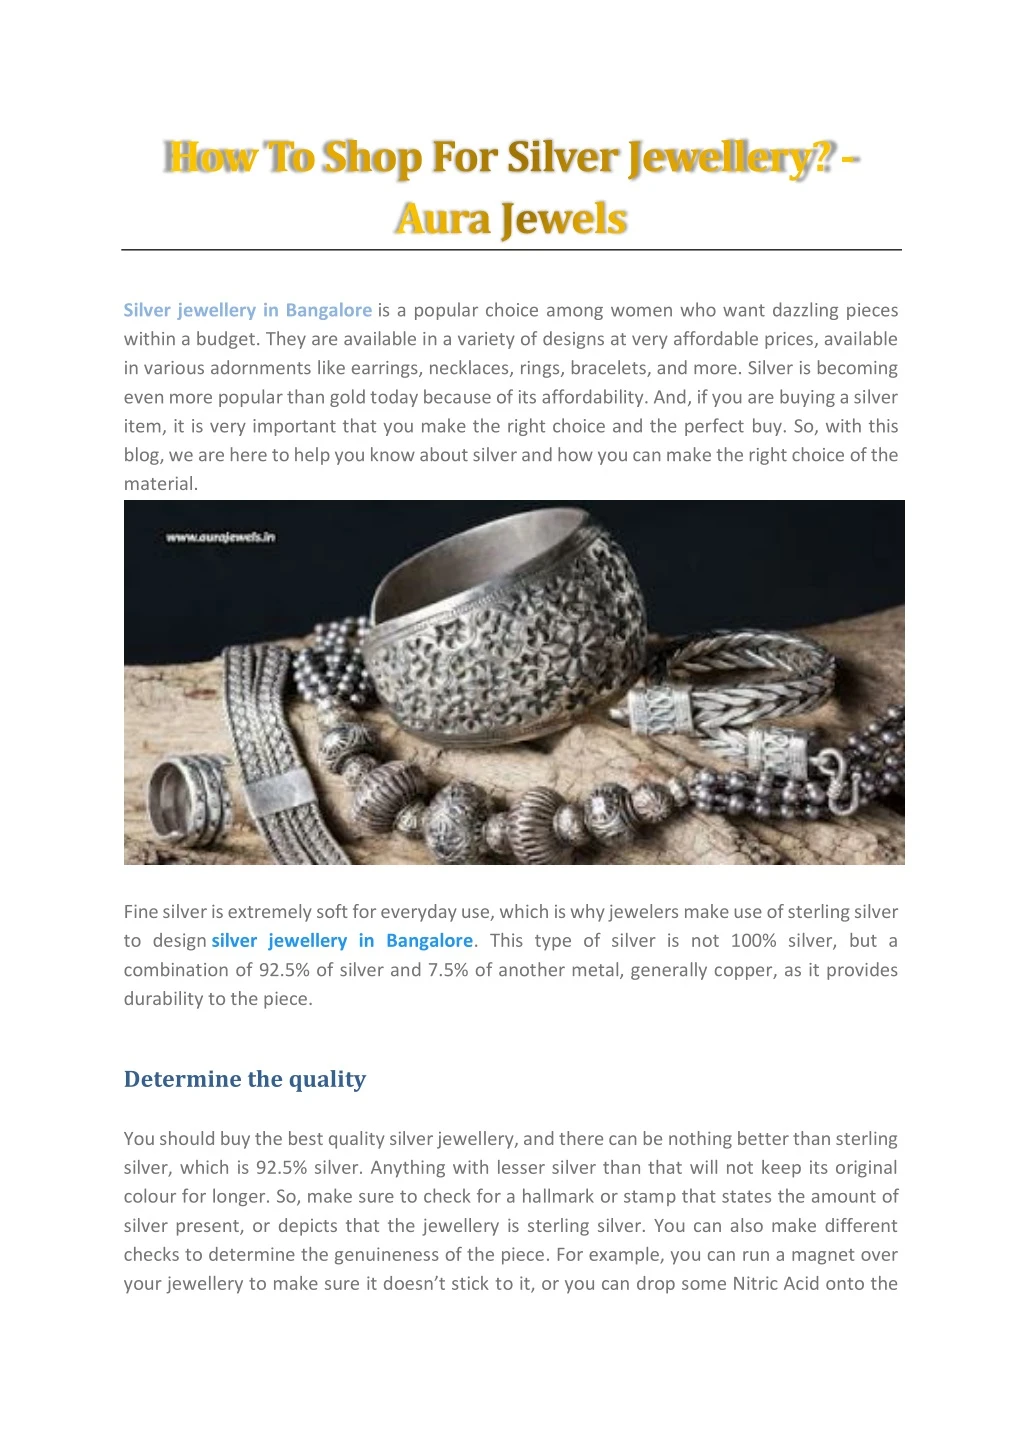 silver jewellery in bangalore is a popular choice